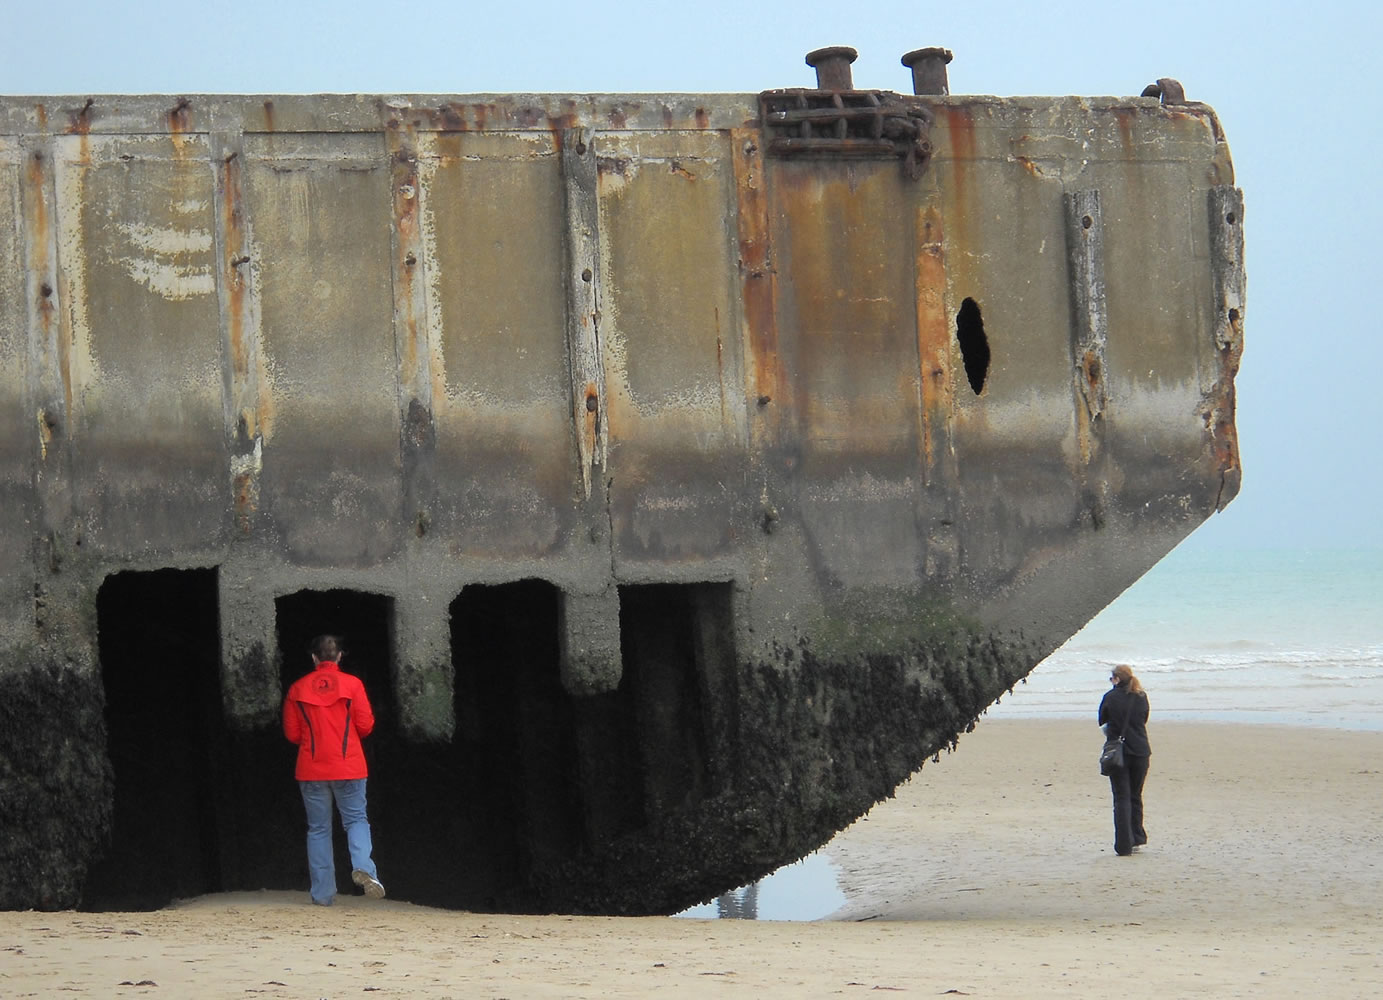 A visitor inspects the remains of an artificial harbor used by Allied forces during World War II on the sand at Arromanches, France.